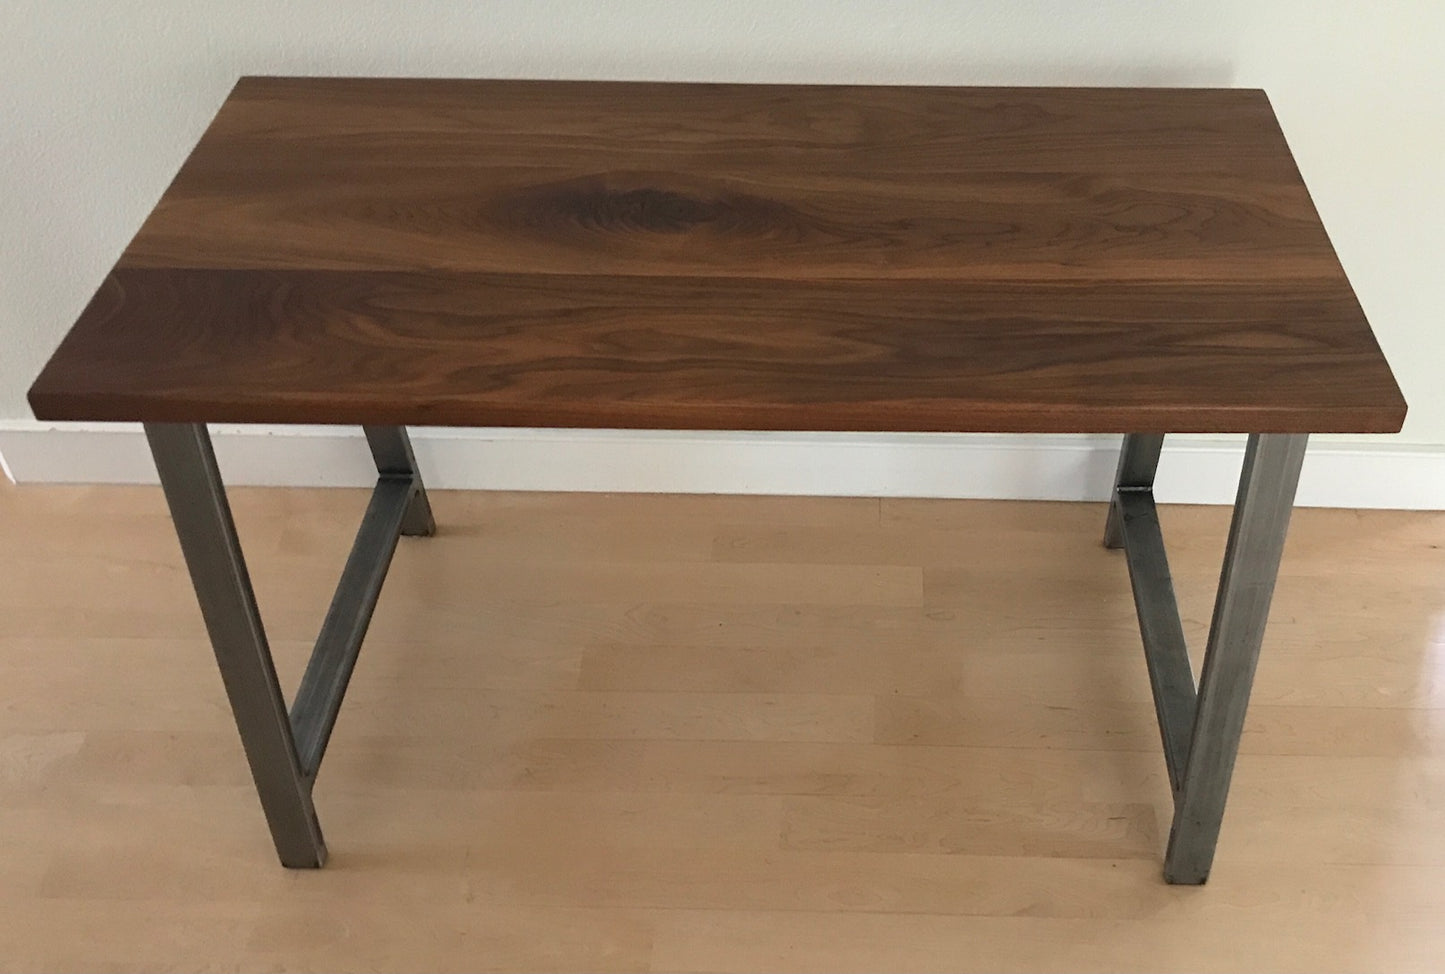 Walnut Desk - front angled view